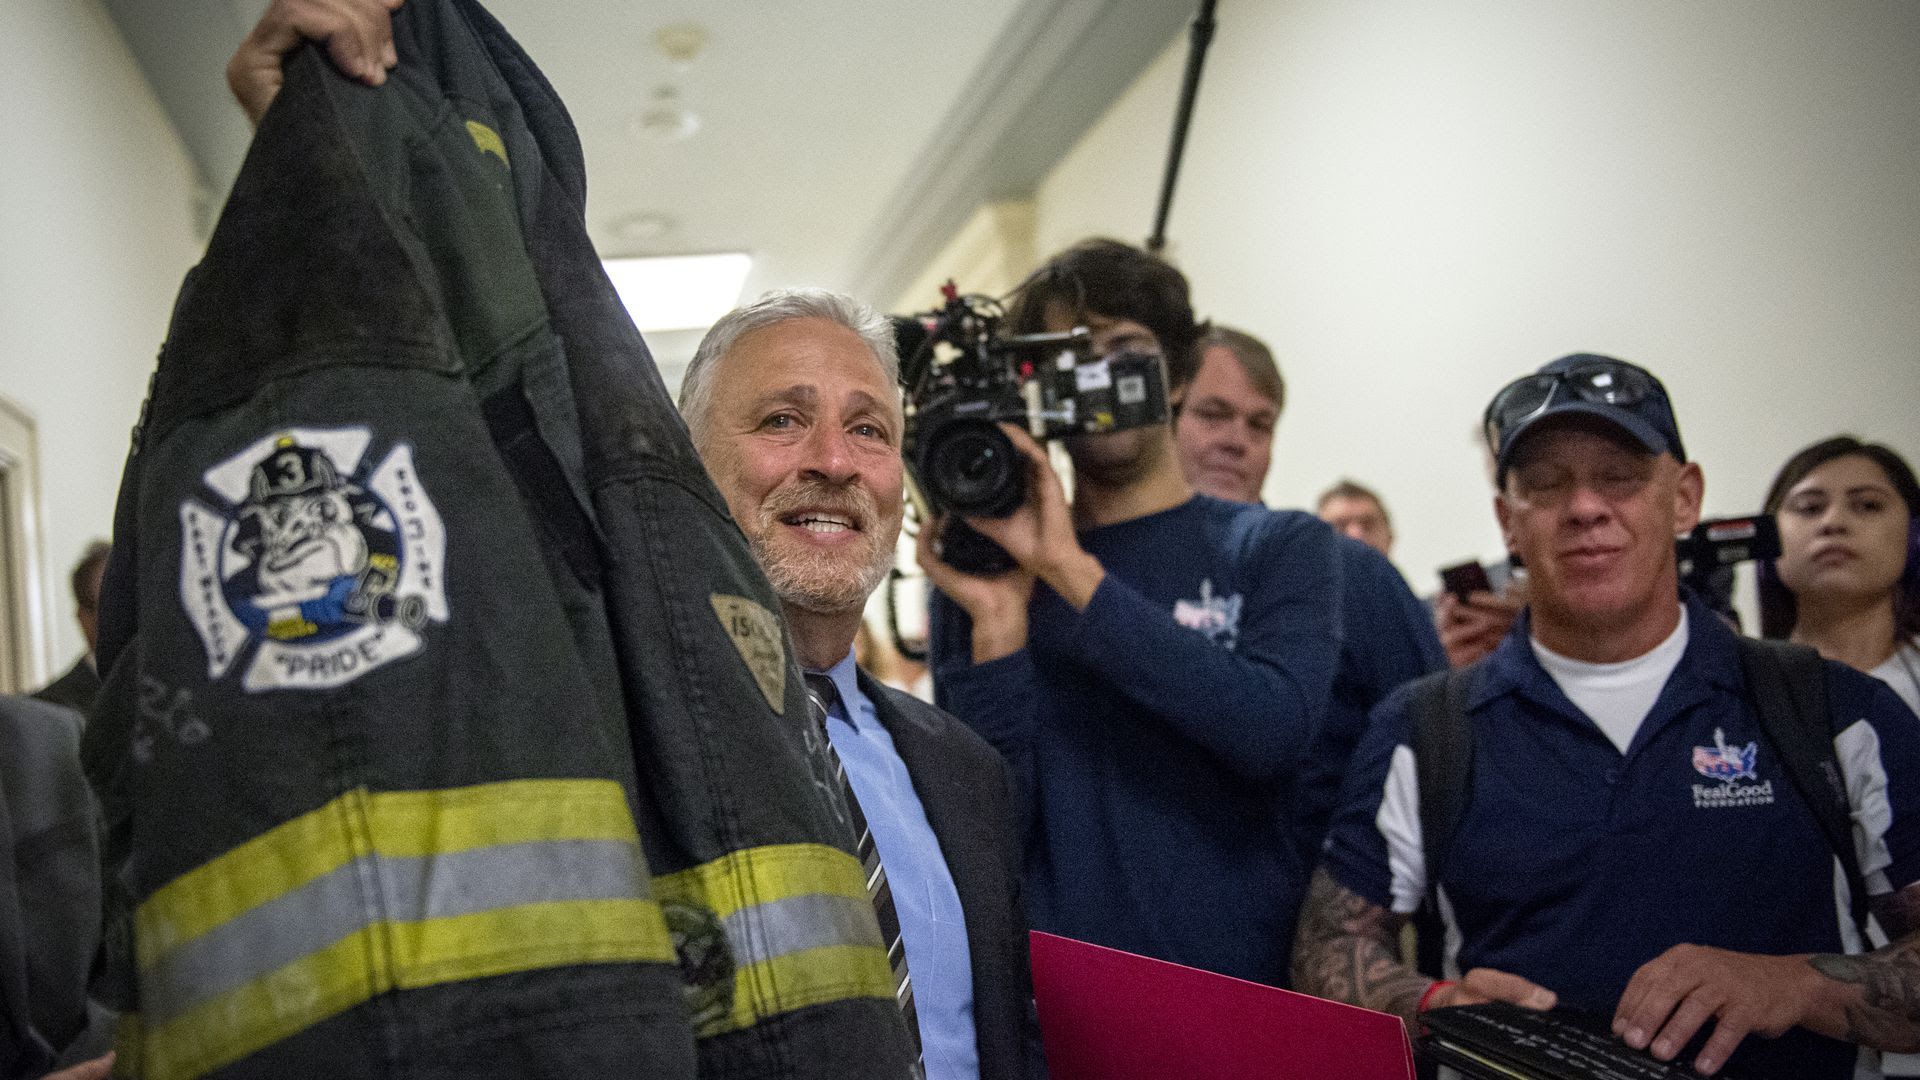 Jon Stewart holds up the jacket of first responder Ray Pfeifer before testifying at a hearing before the House Judiciary Committee in June. 